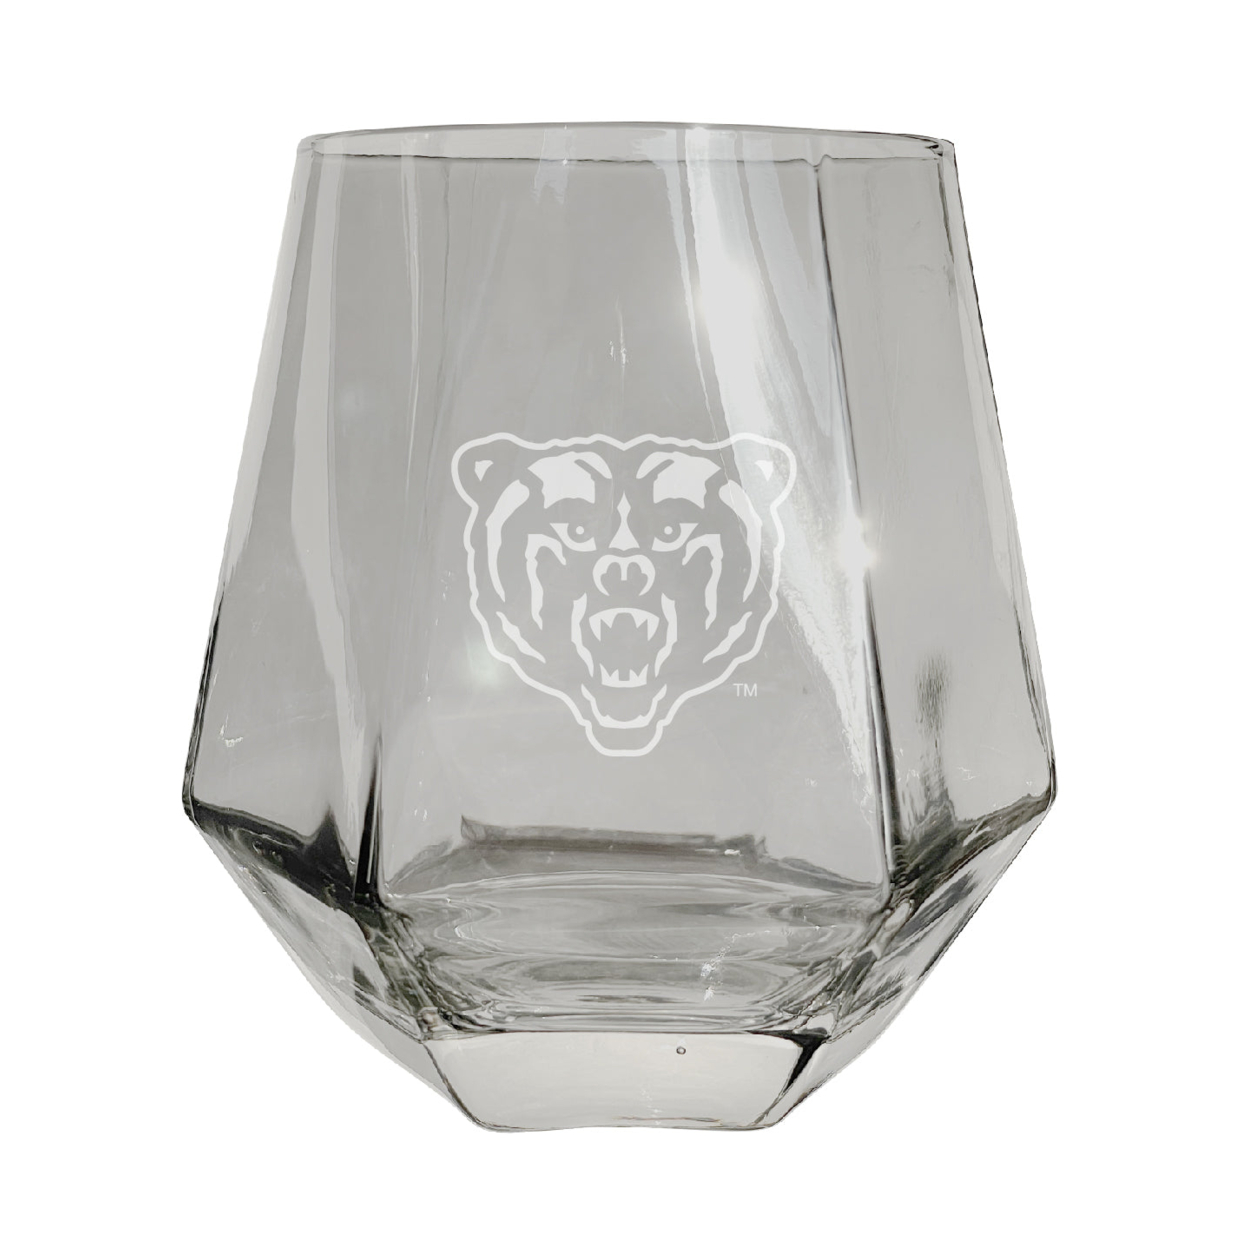 Mercer University Etched Diamond Cut Stemless 10 Ounce Wine Glass Clear